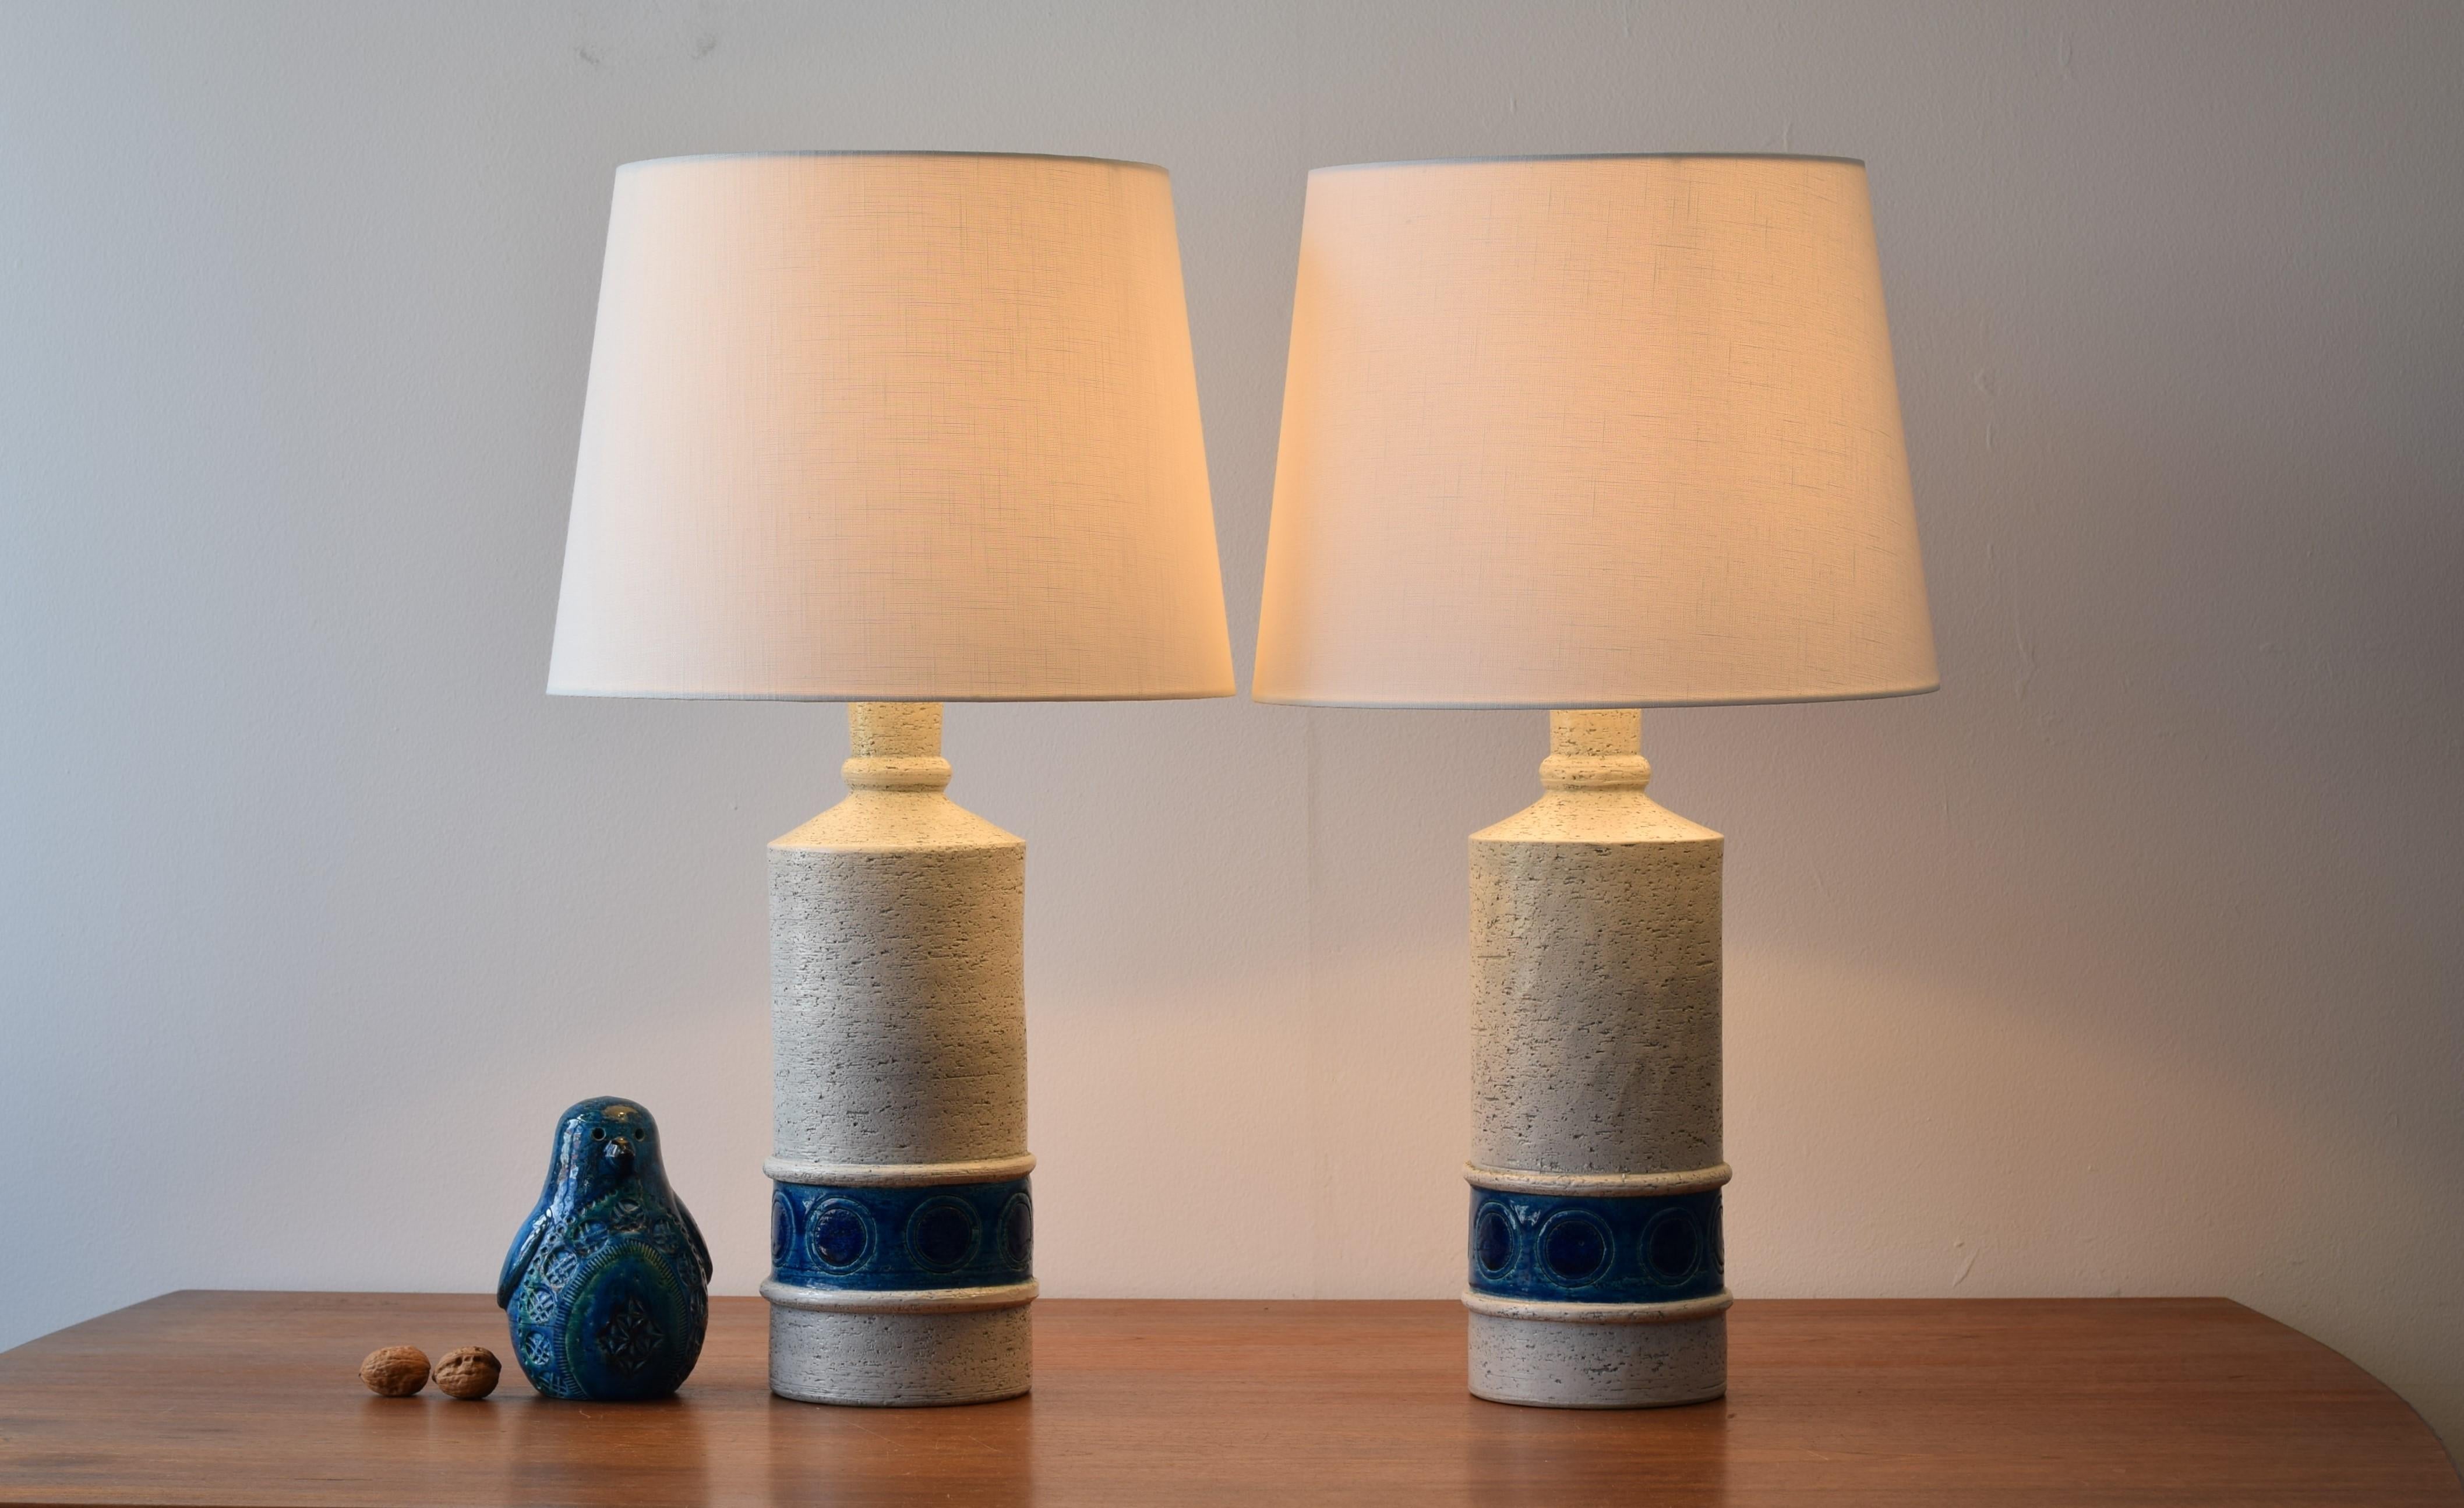 Pair of vintage Bitossi lamps including new quality lampshades!

They have a rough white surface with a turquoise and blue circle decor.

The lampshades are designed in Denmark and made of woven fabric with some texture and are natural white.